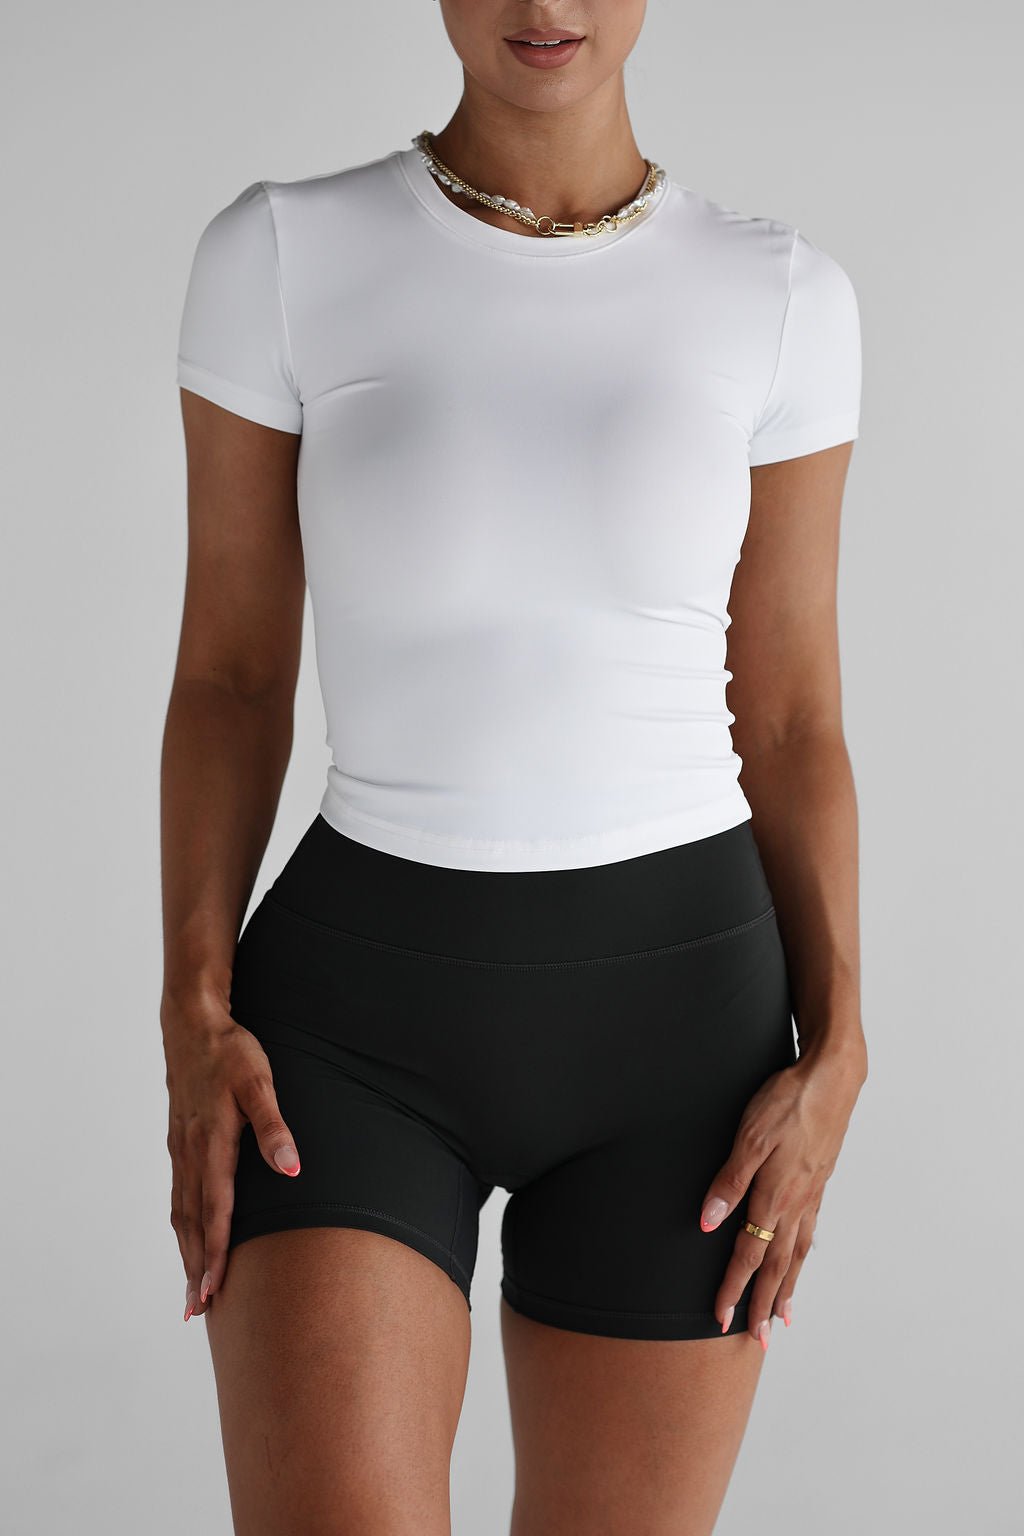 SCULPT Fitted Tee - White - LEELO ACTIVE